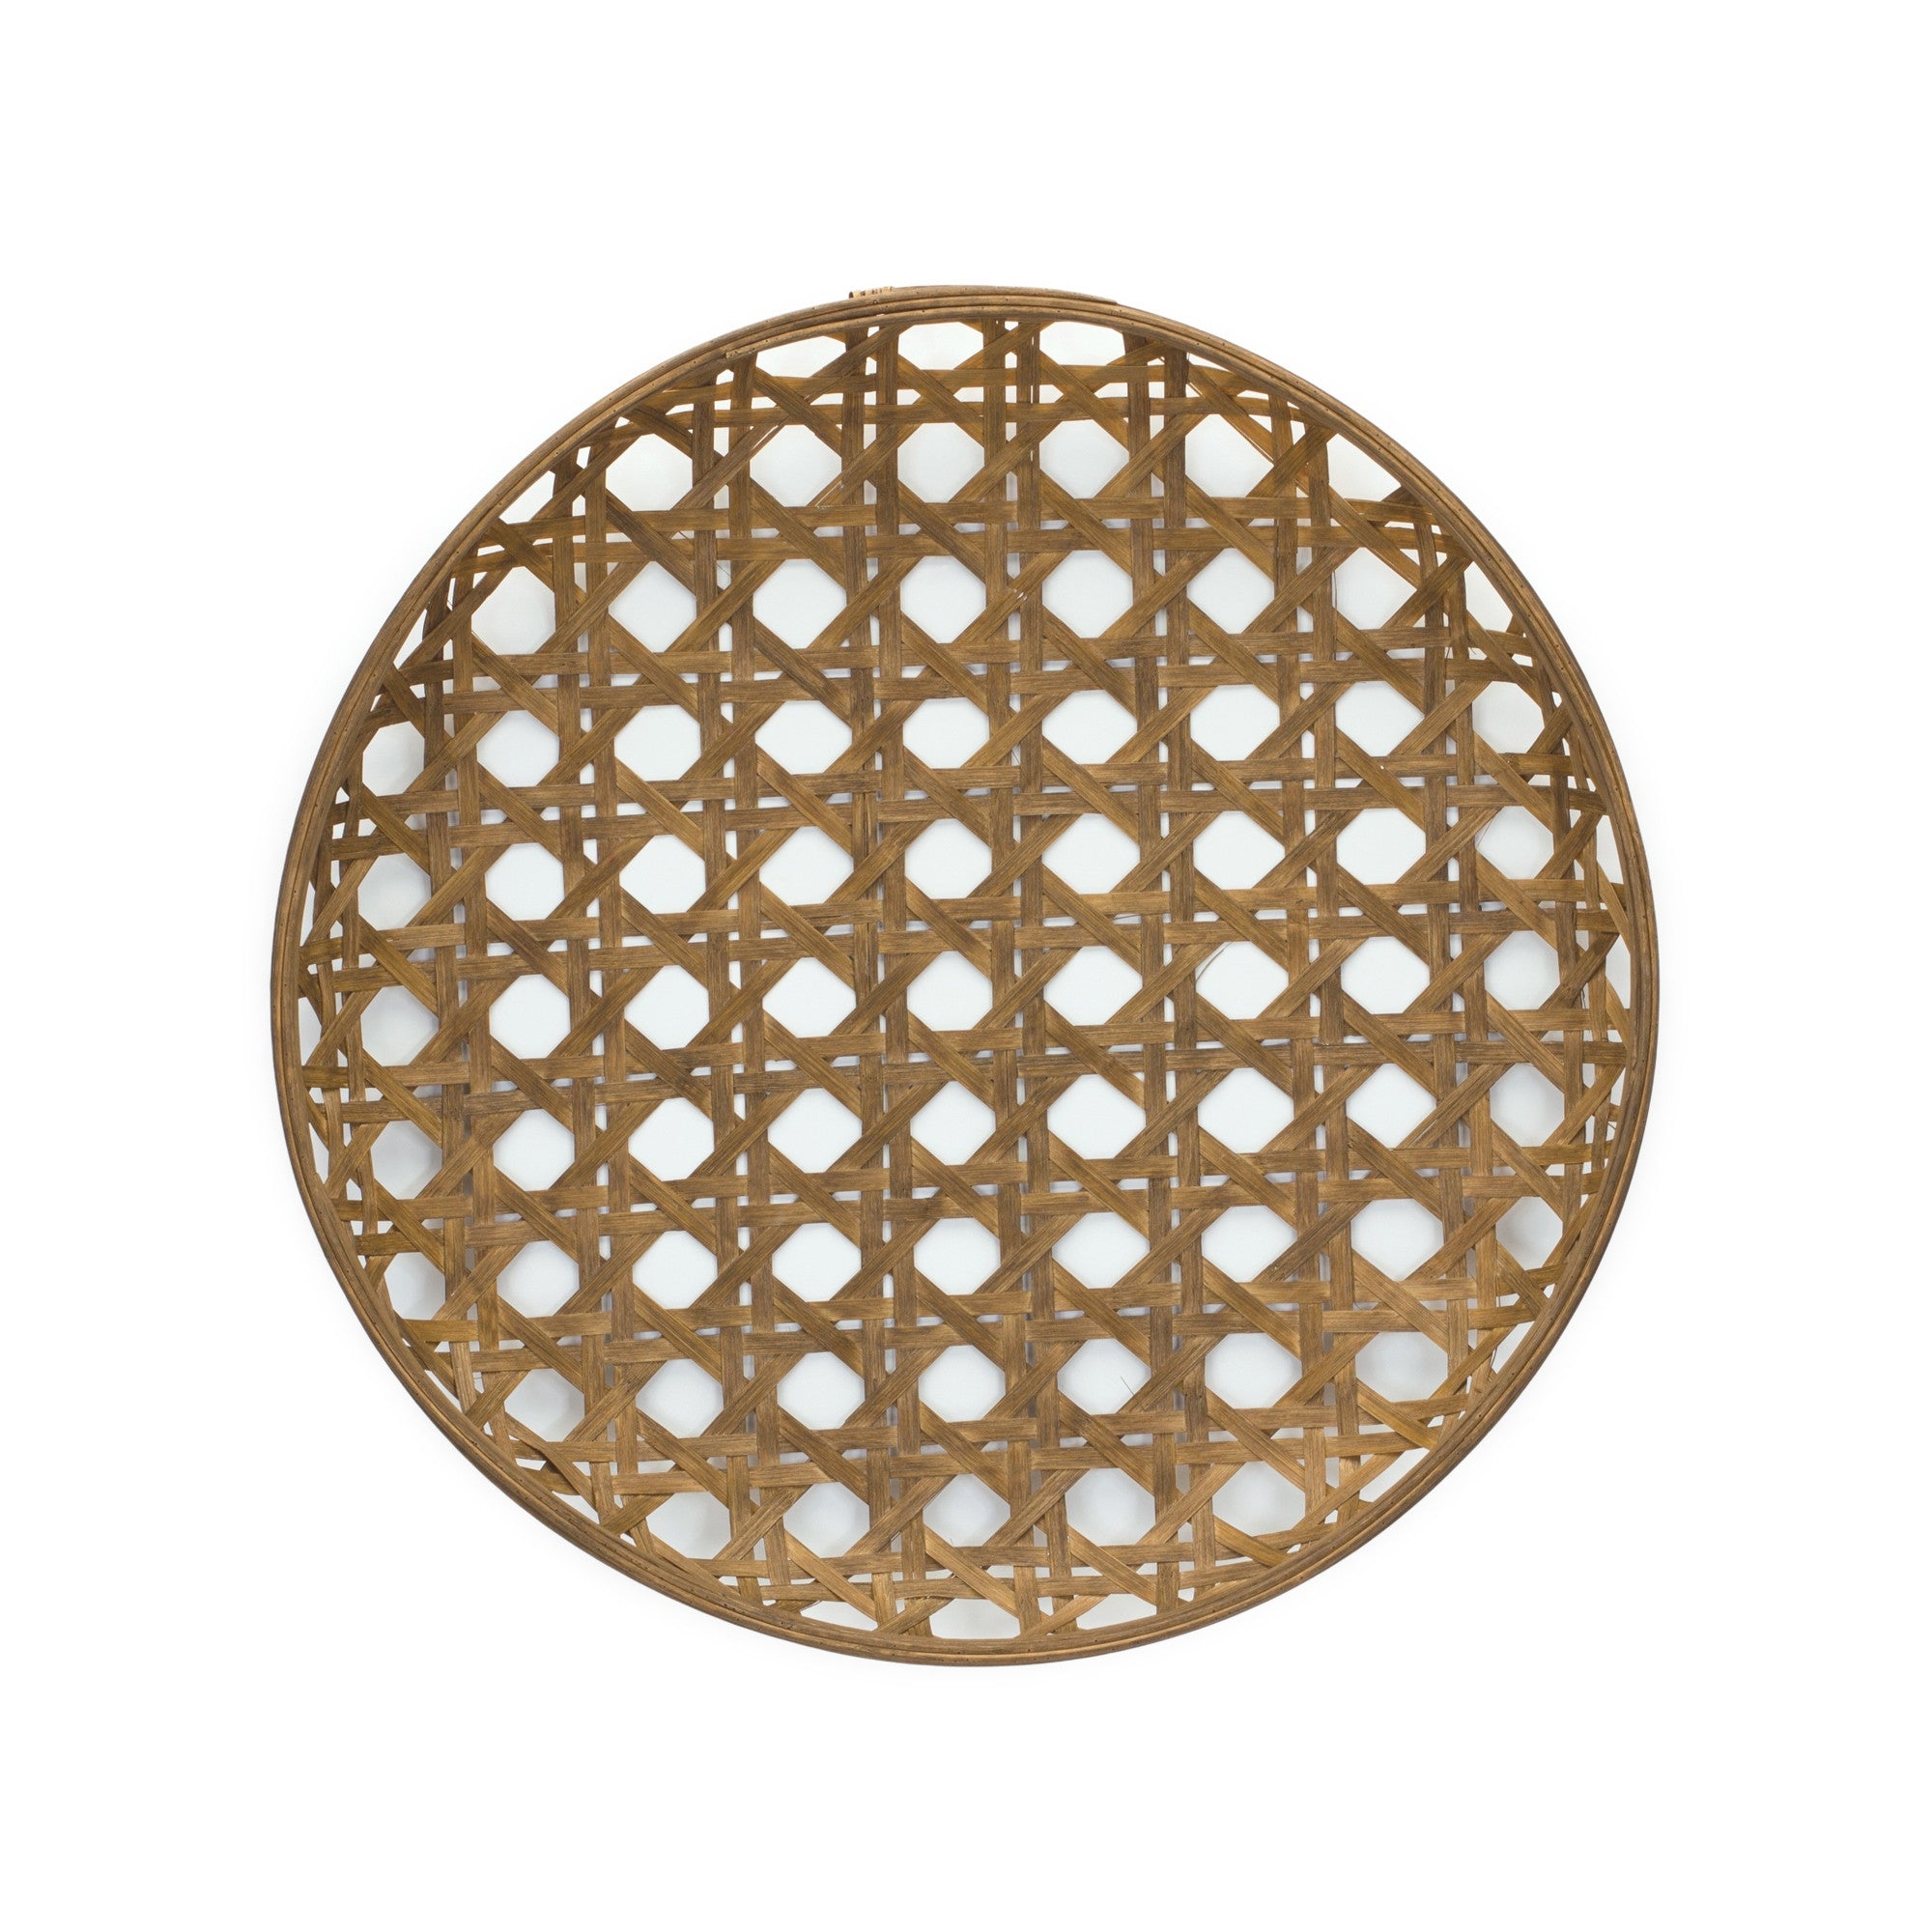 22" Brown Bamboo Weave Round Wood Tray